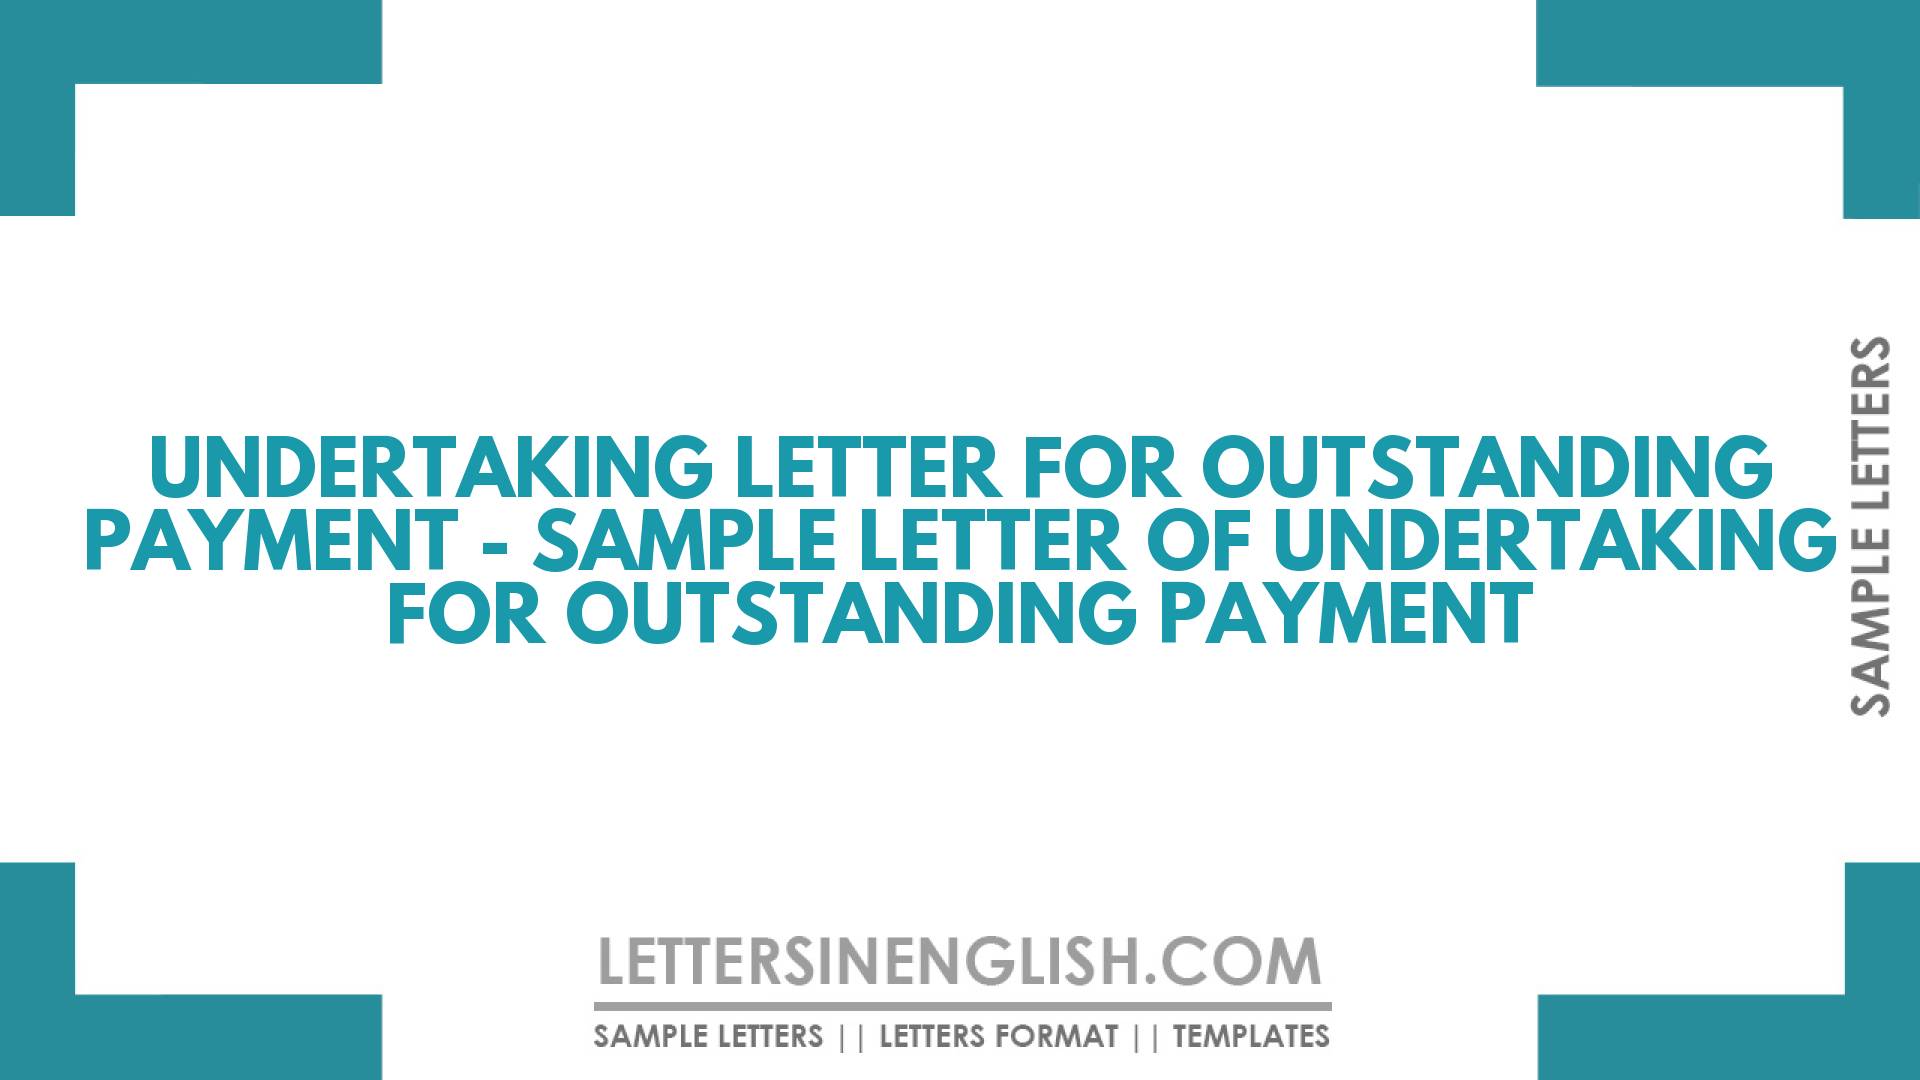 Undertaking Letter for Outstanding Payment – Sample Letter of Undertaking for Outstanding Payment